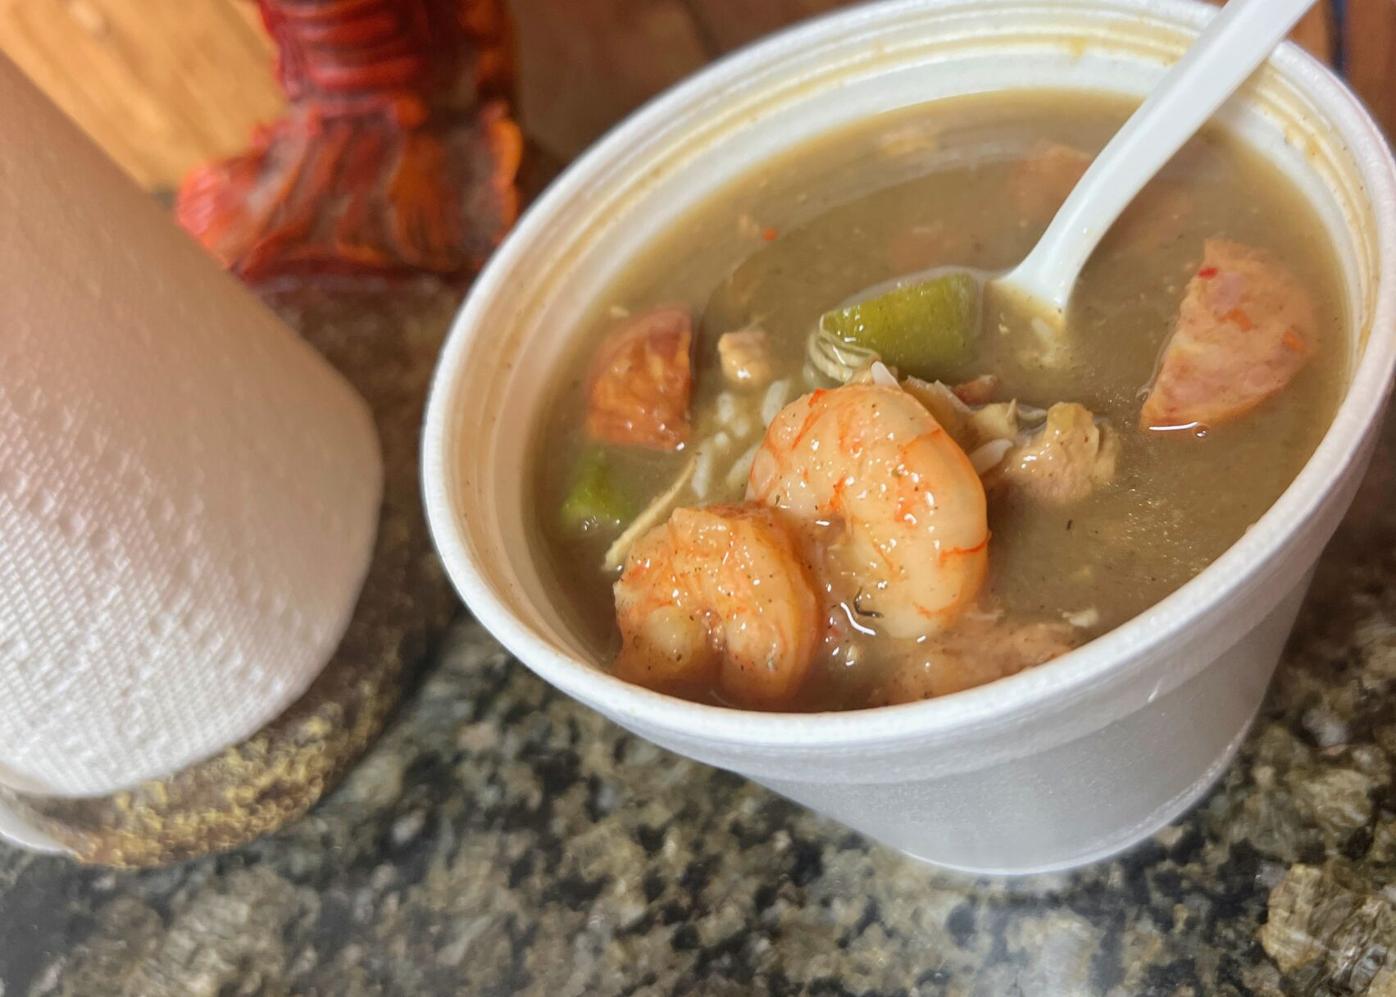 10 full meals for $10 in New Orleans